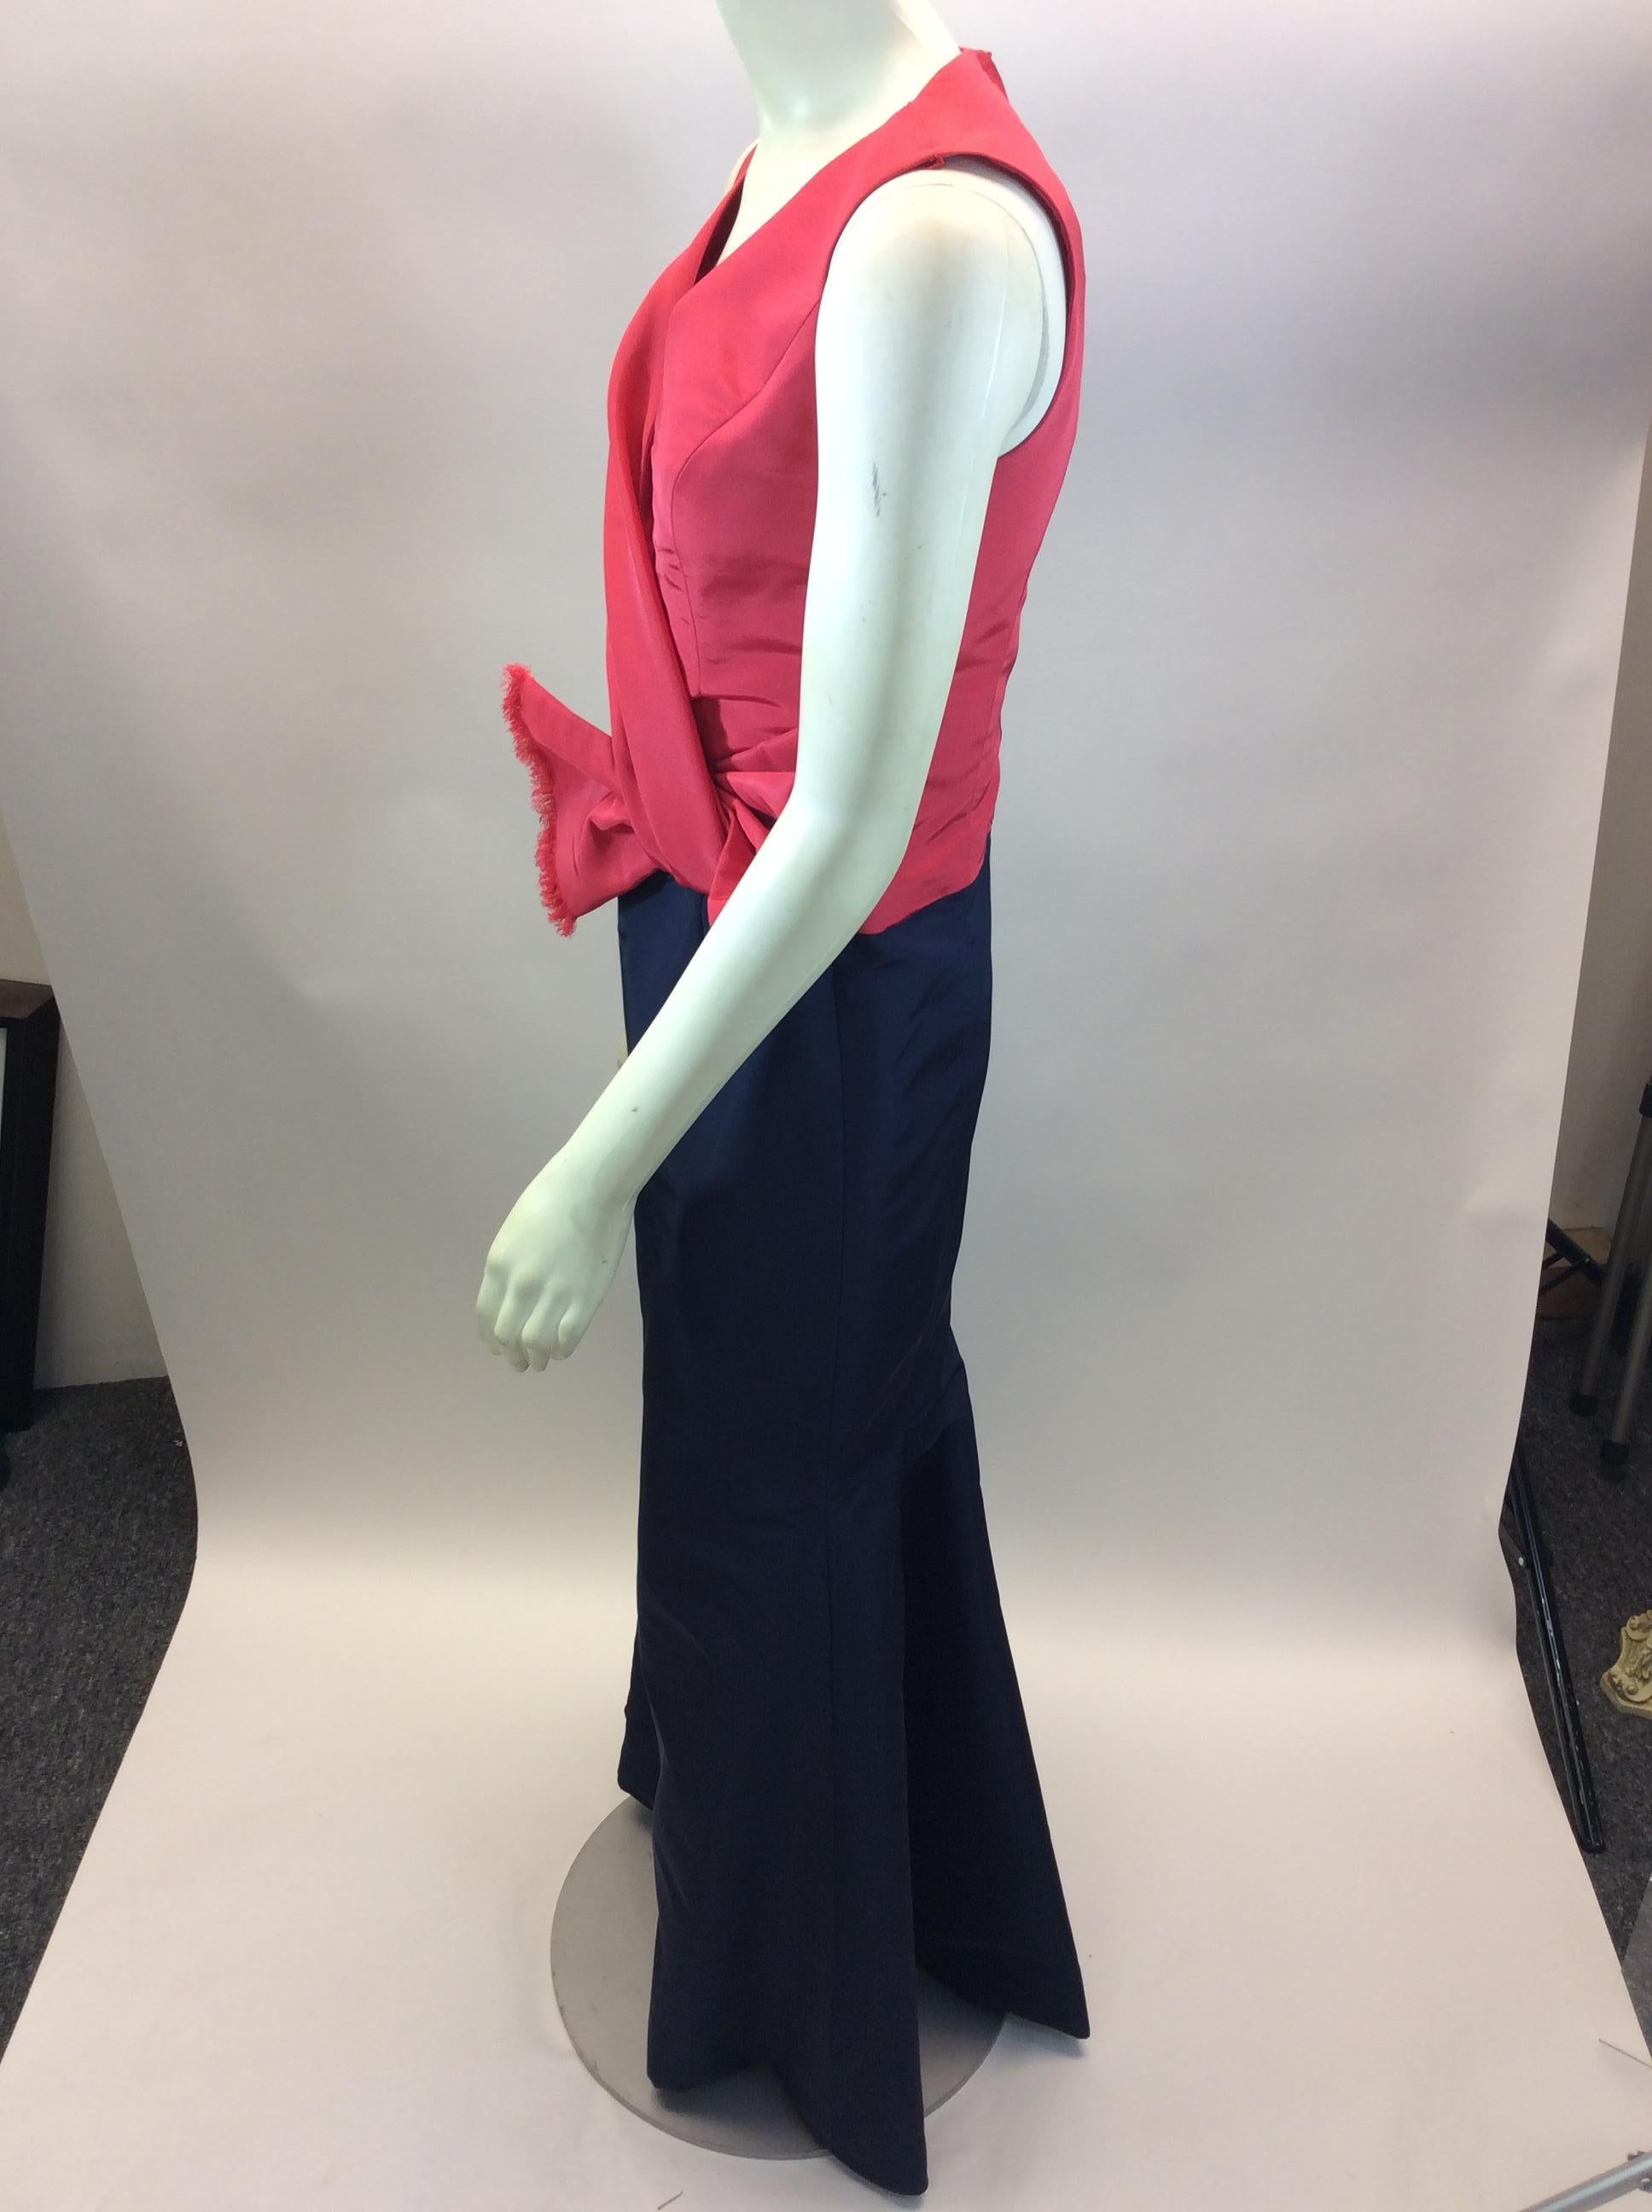 Carolina Herrera Red and Navy Blue Formal Gown
$799
Made in the US
100% Silk
Size 6
Length 57